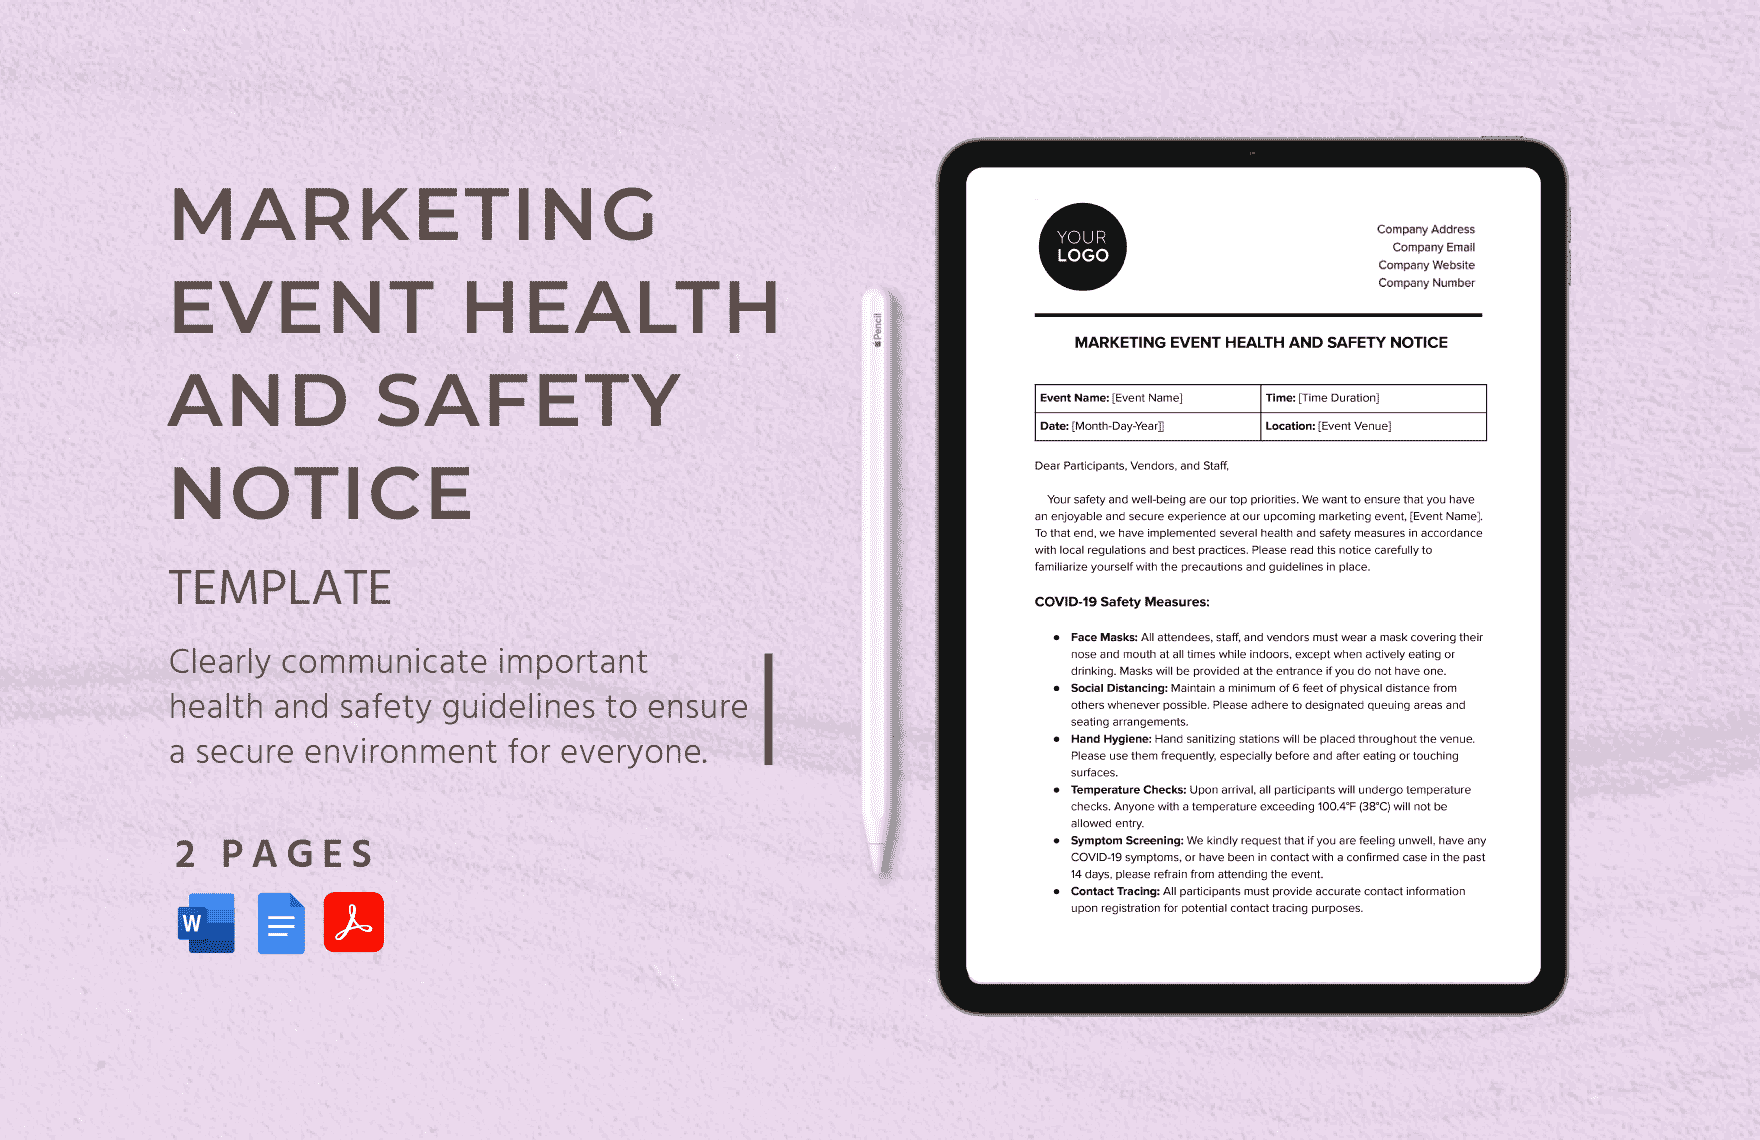 Marketing Event Health and Safety Notice Template in Word, Google Docs, PDF